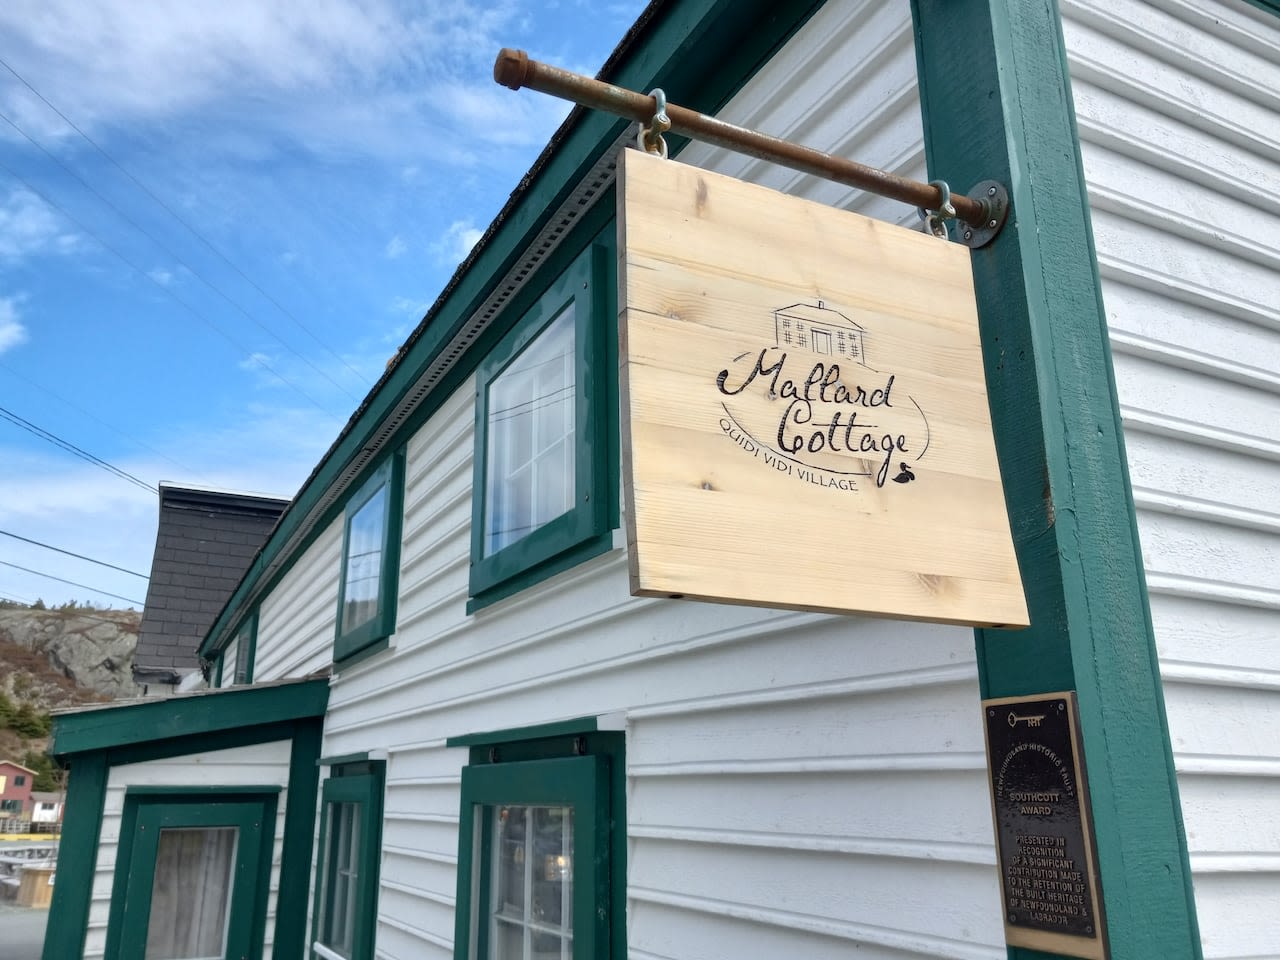 Mallard Cottage bankruptcy casts cloud over restaurant industry as profitable summer season looms